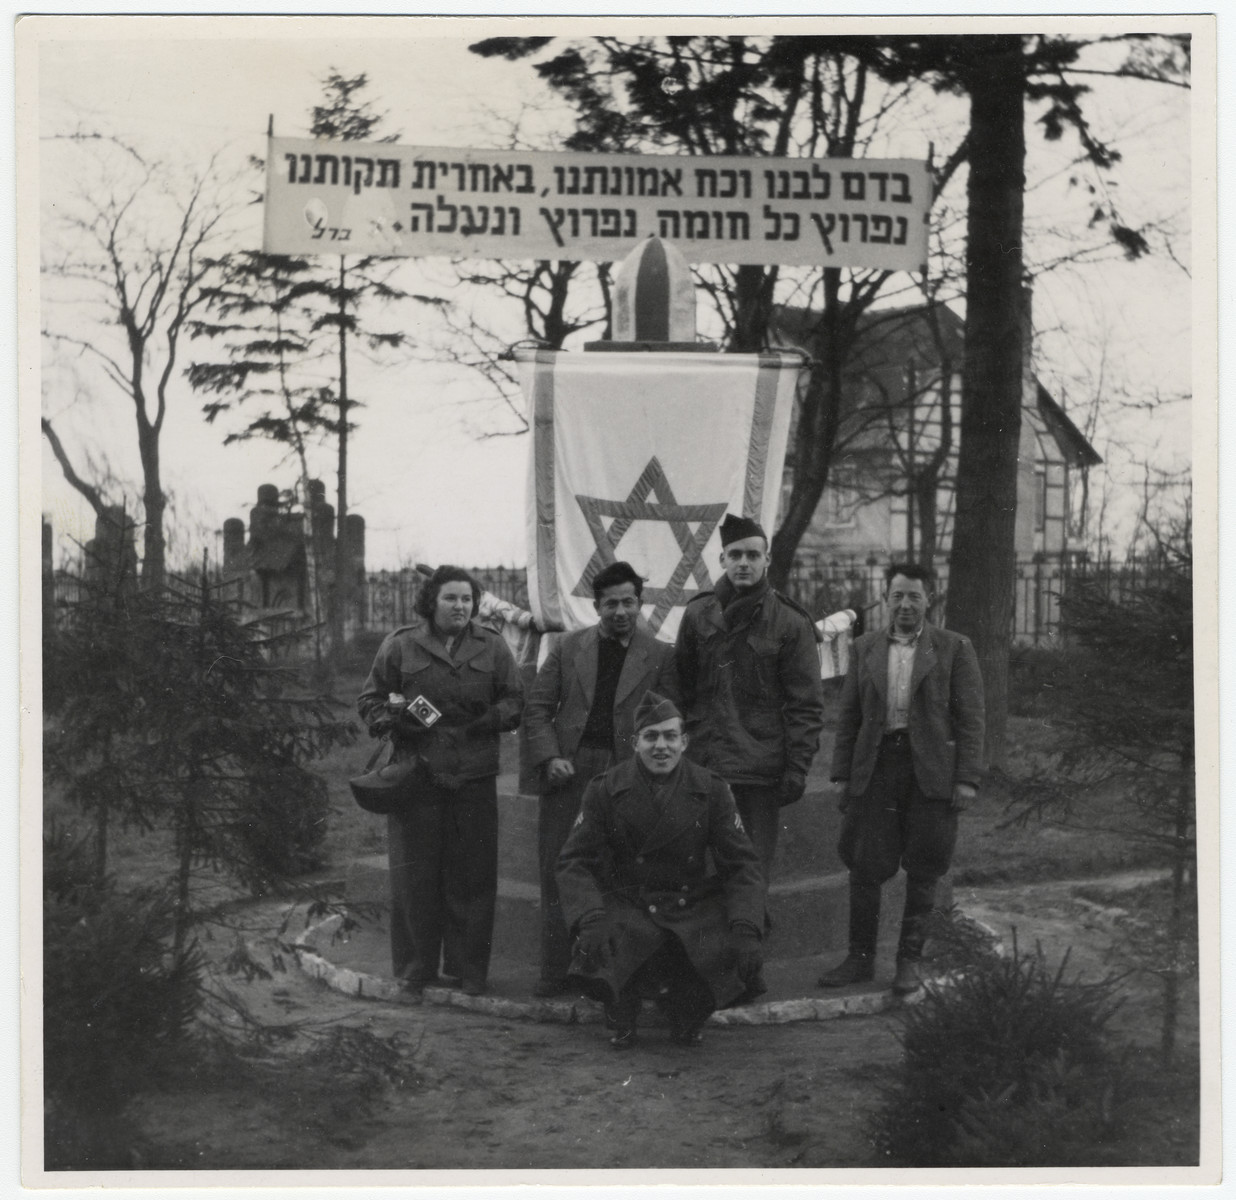 Five people, including members of the Frankfurt Jewish GI Council pose in front of a memorial in a German displaced persons' camp.

Crouching in front in Asher Hirsh, a German Jewish refugee who joined the US Army.

The Hebrew banner reads: "With the blood of our hearts, and the strength of our faith, with our last hopes, we will breach every wall, breach and ascend."